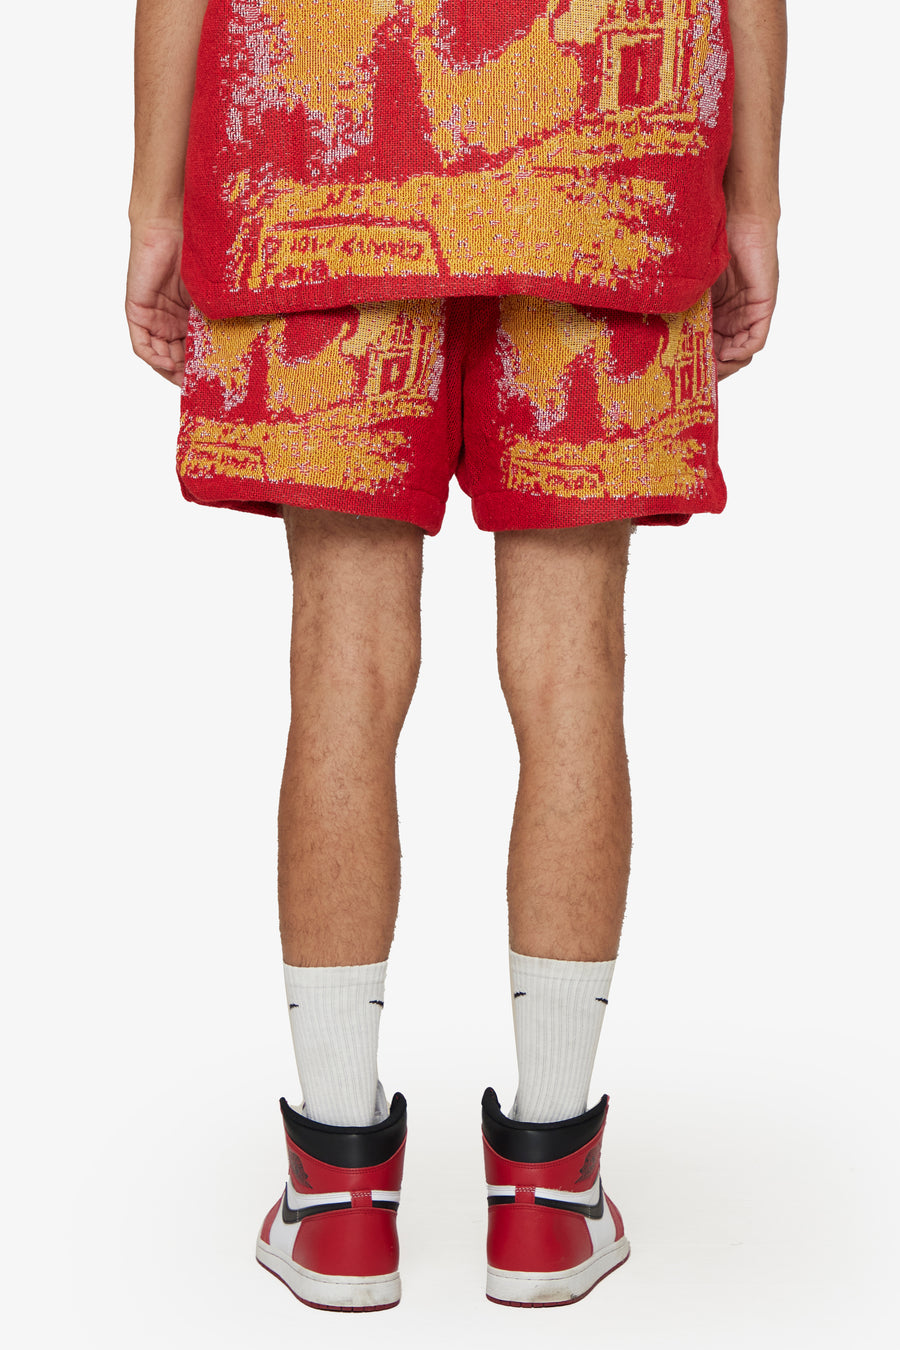 "GHOST HANDS" RED TAPESTRY SHORTS